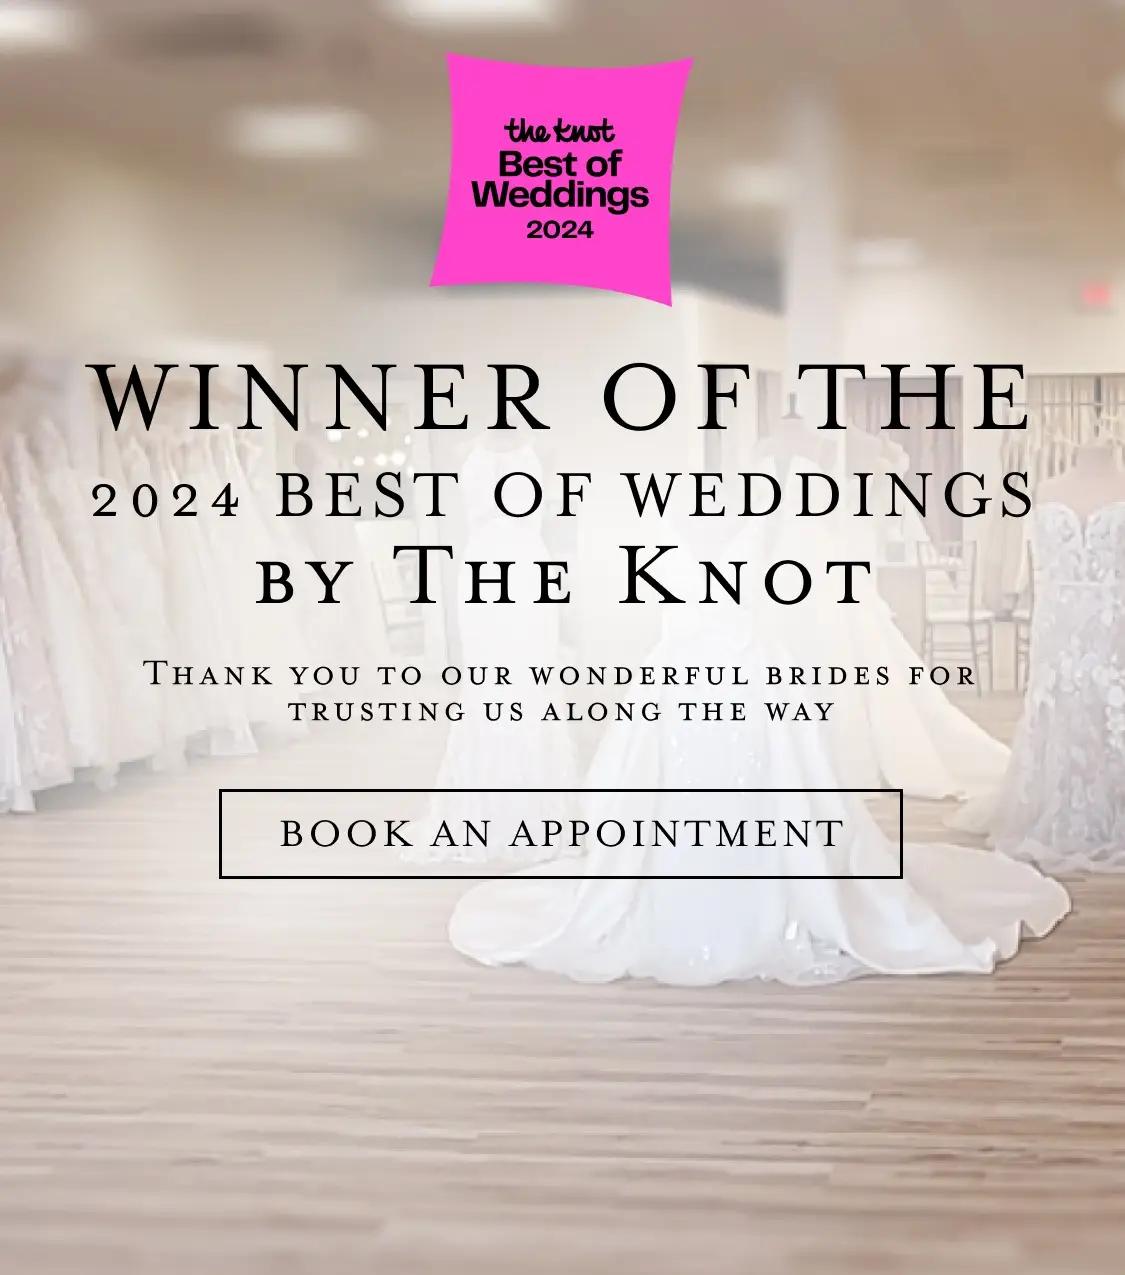 Bella Bridal Gallery is the winner of the 2024 Best of Wedding Knot award